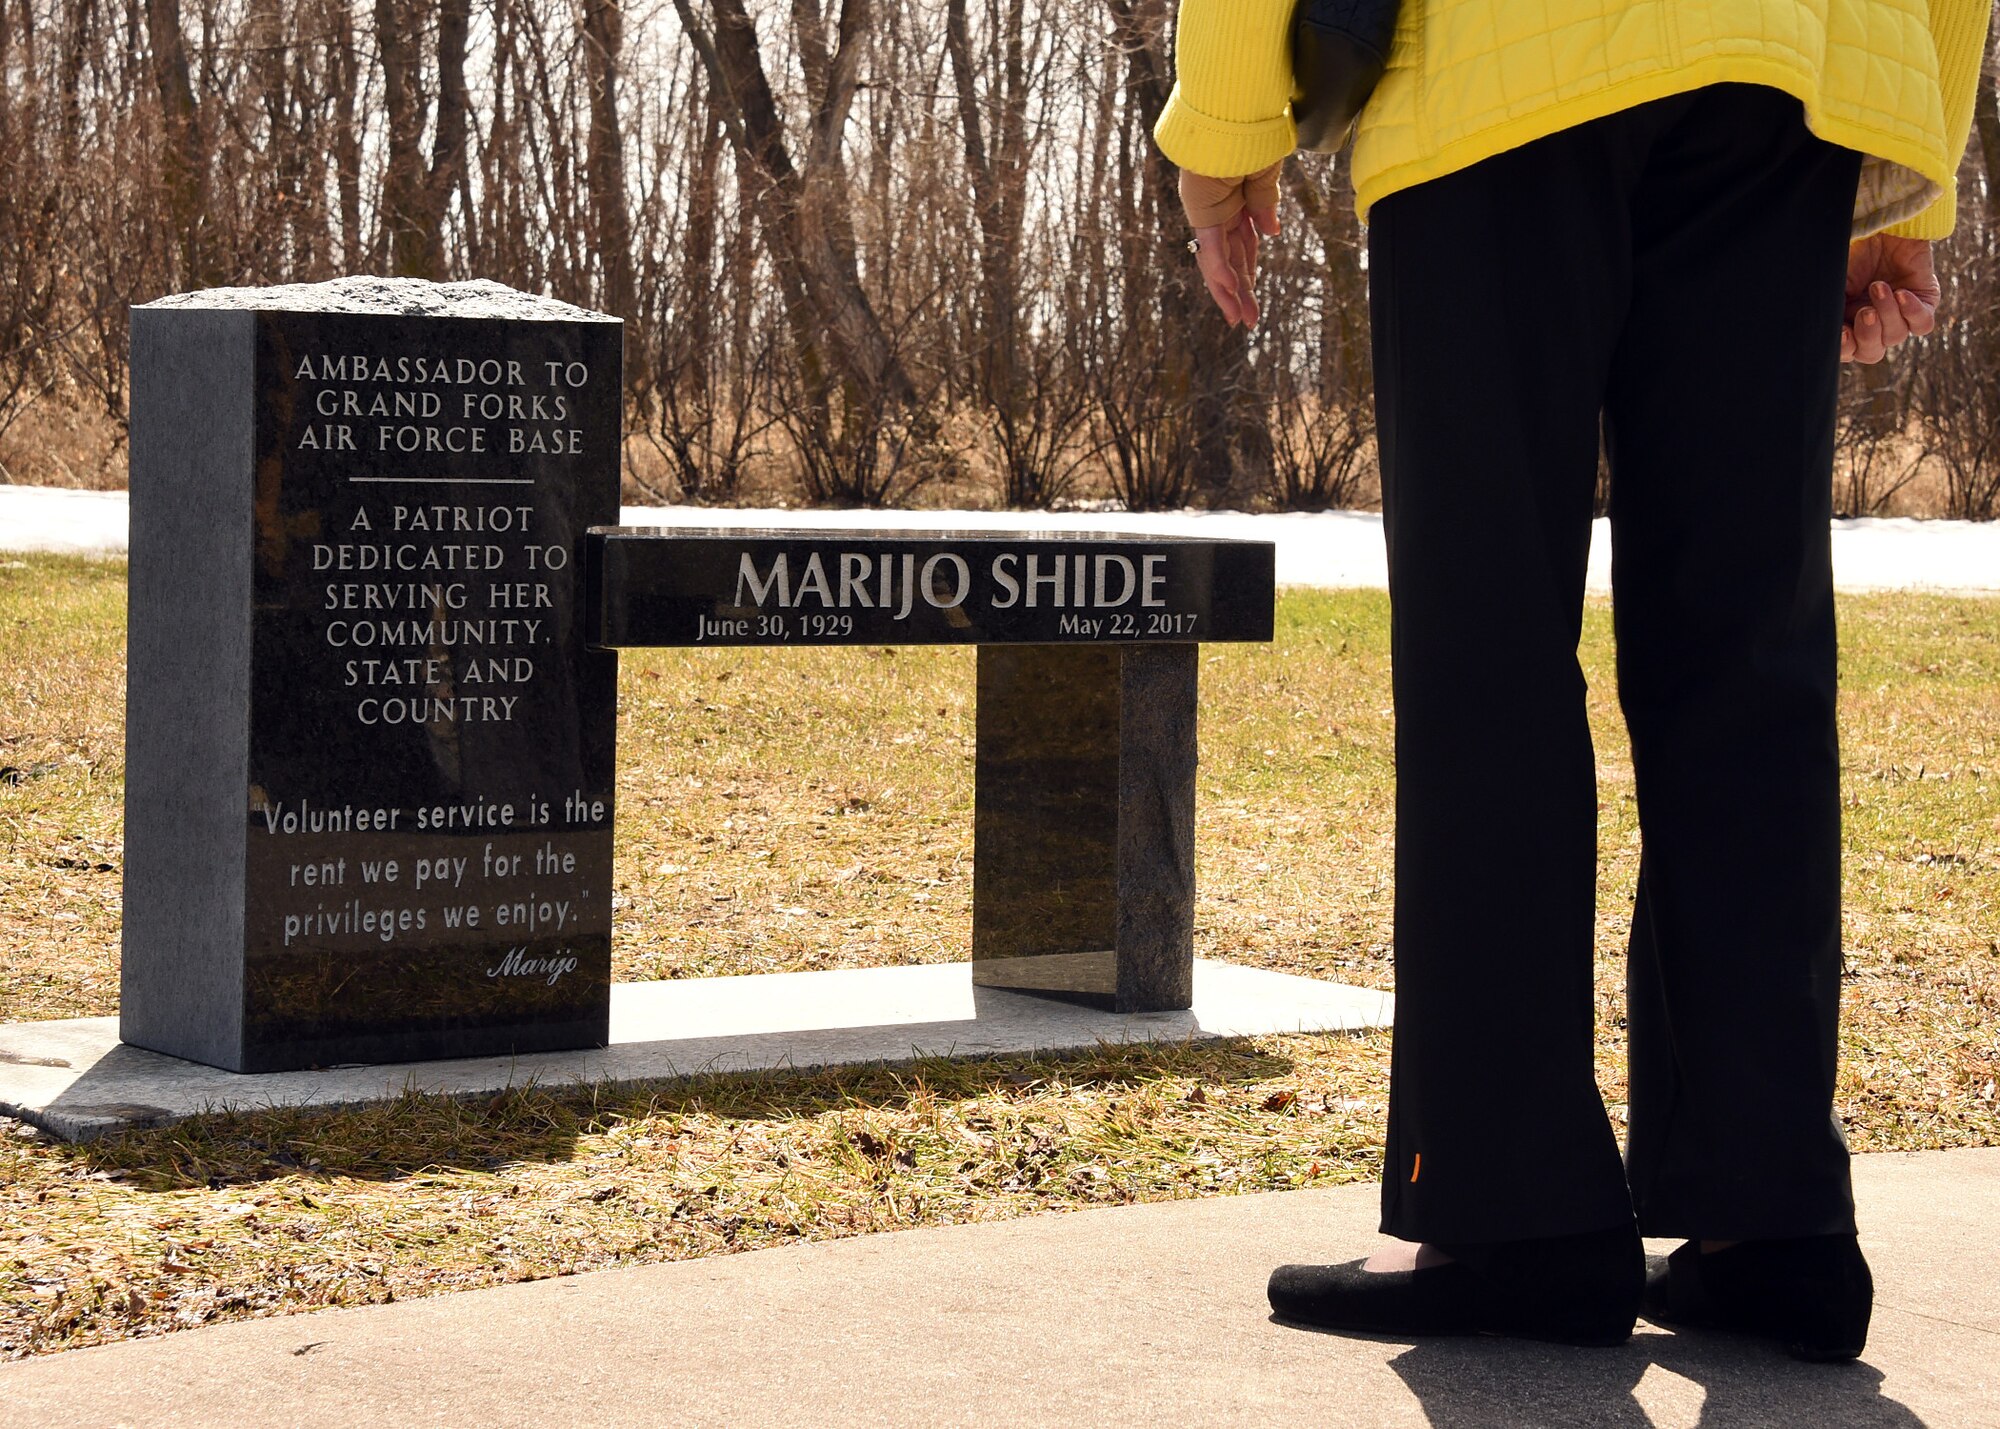 A friend of the late Marijo Shide, Grand Forks Air Force Base Ambassador, admires the new dedicated bench on behalf of Shide, April 20, 2018, on Grand Forks AFB, N.D. More than 50 Airmen, ambassadors, friends and family members gathered in honor of Shide, who lived as an example of her motto, “Volunteer service is the rent we pay for the privileges we enjoy.” (Air Force photo by Airman 1st Class Elora J. Martinez)